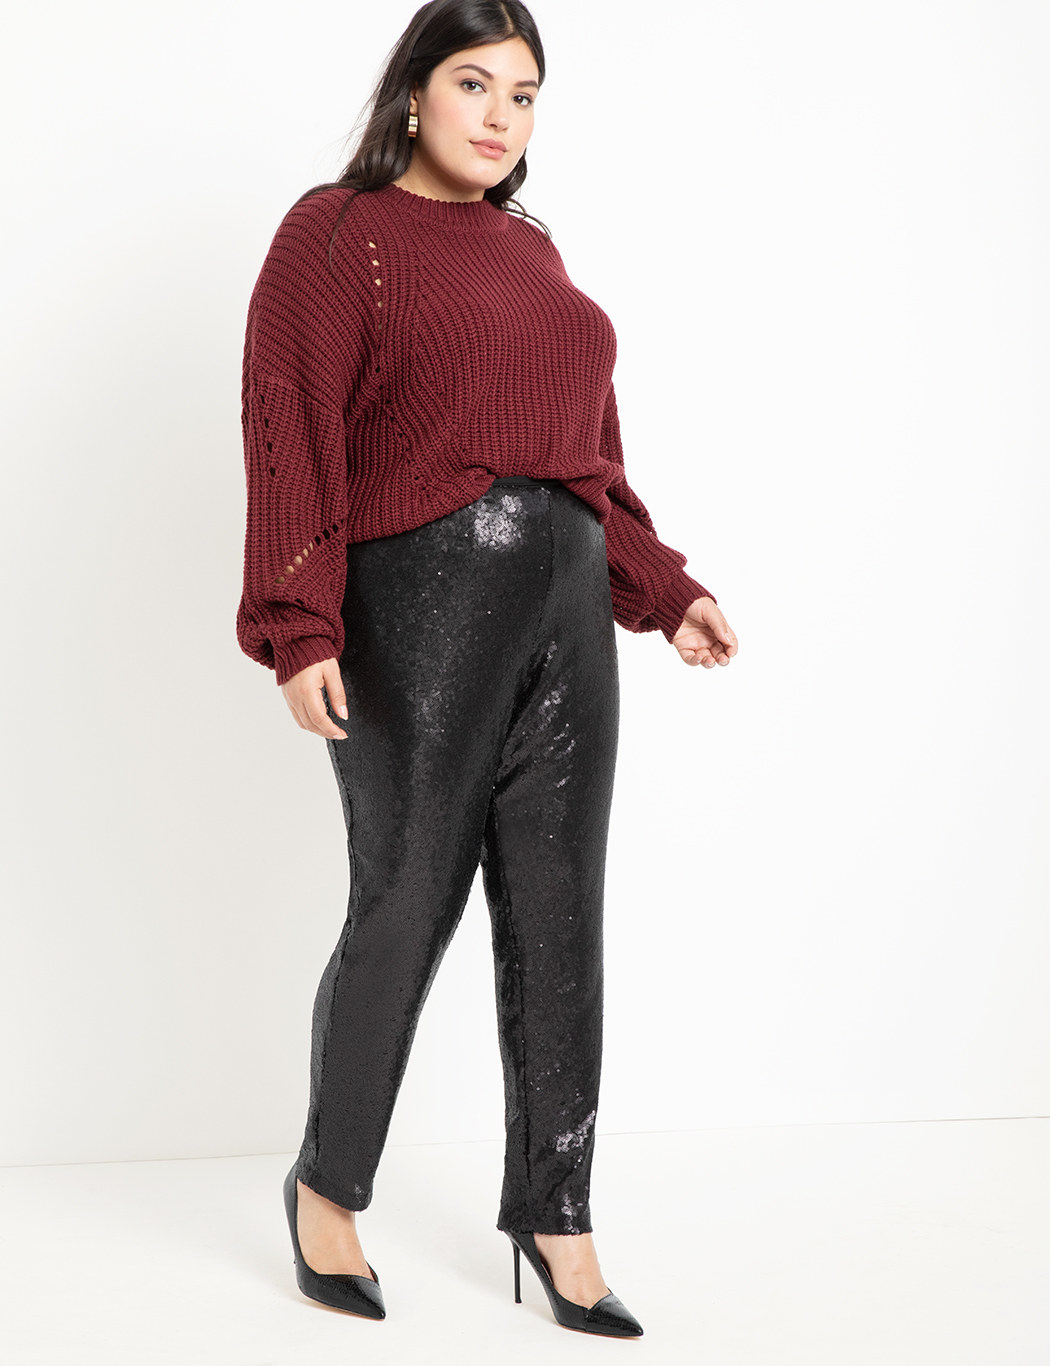 A model wearing the pants with a sweater and closed, pointed-toe heels